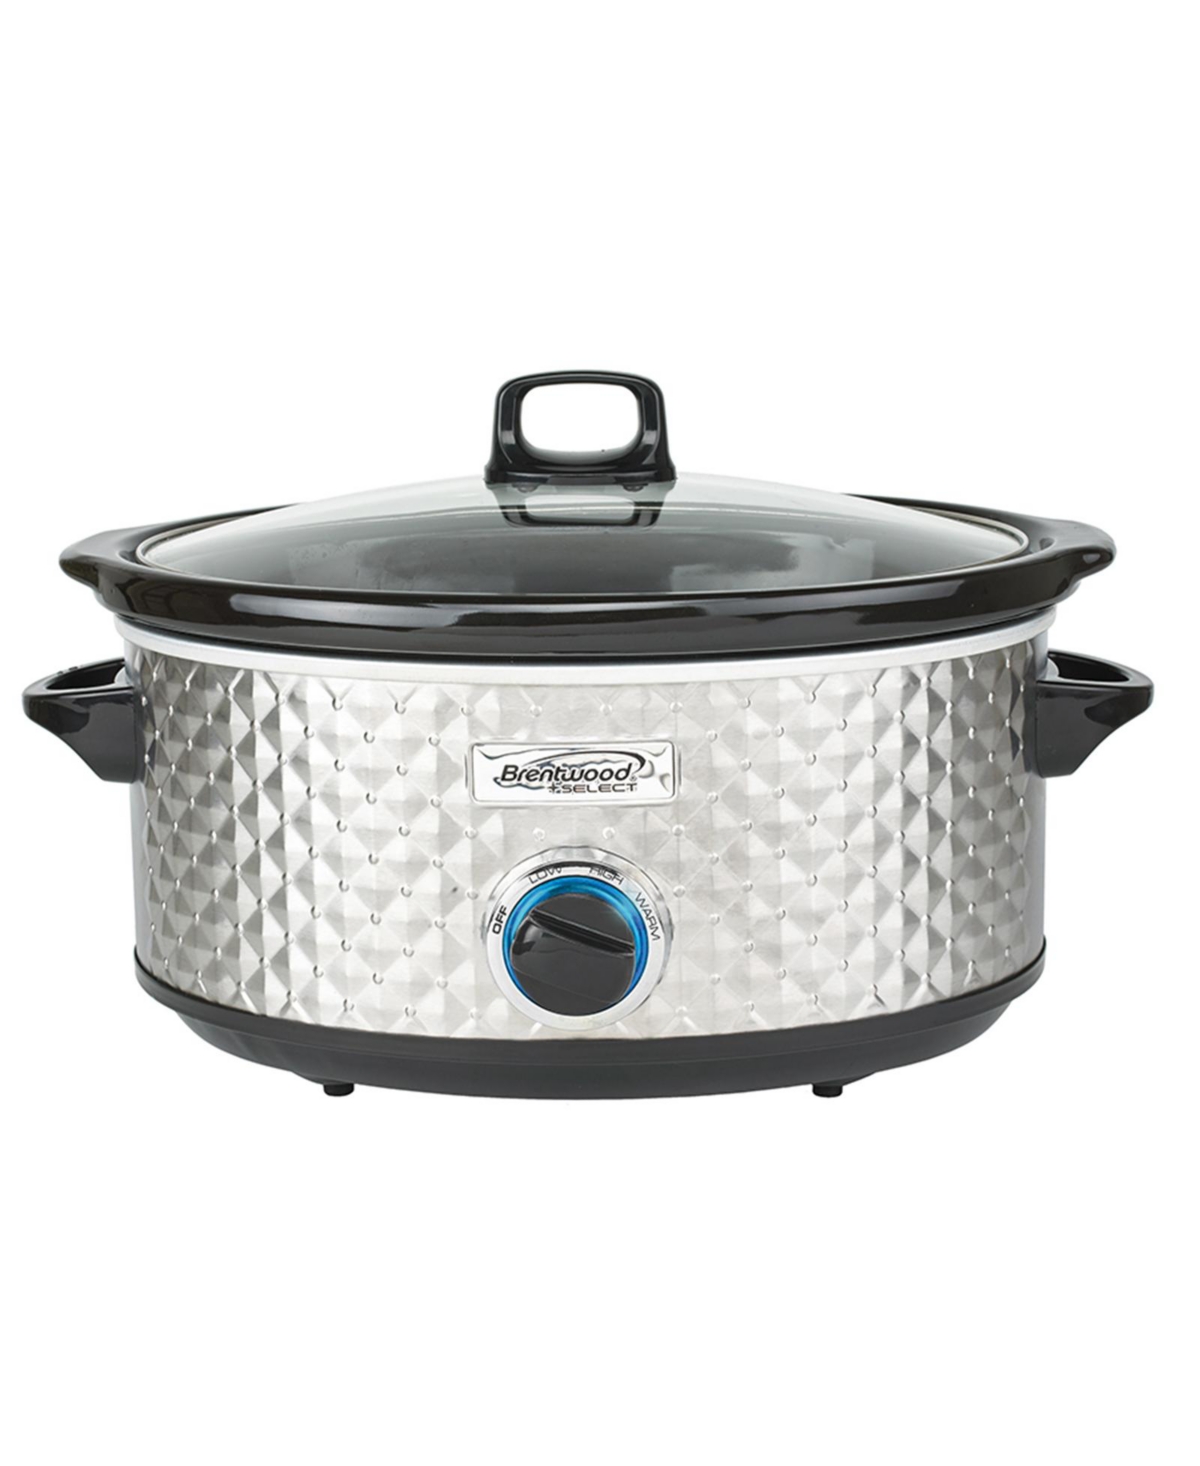 Brentwood 3.5 Quart Diamond Pattern Electric Slow Cooker - Silver